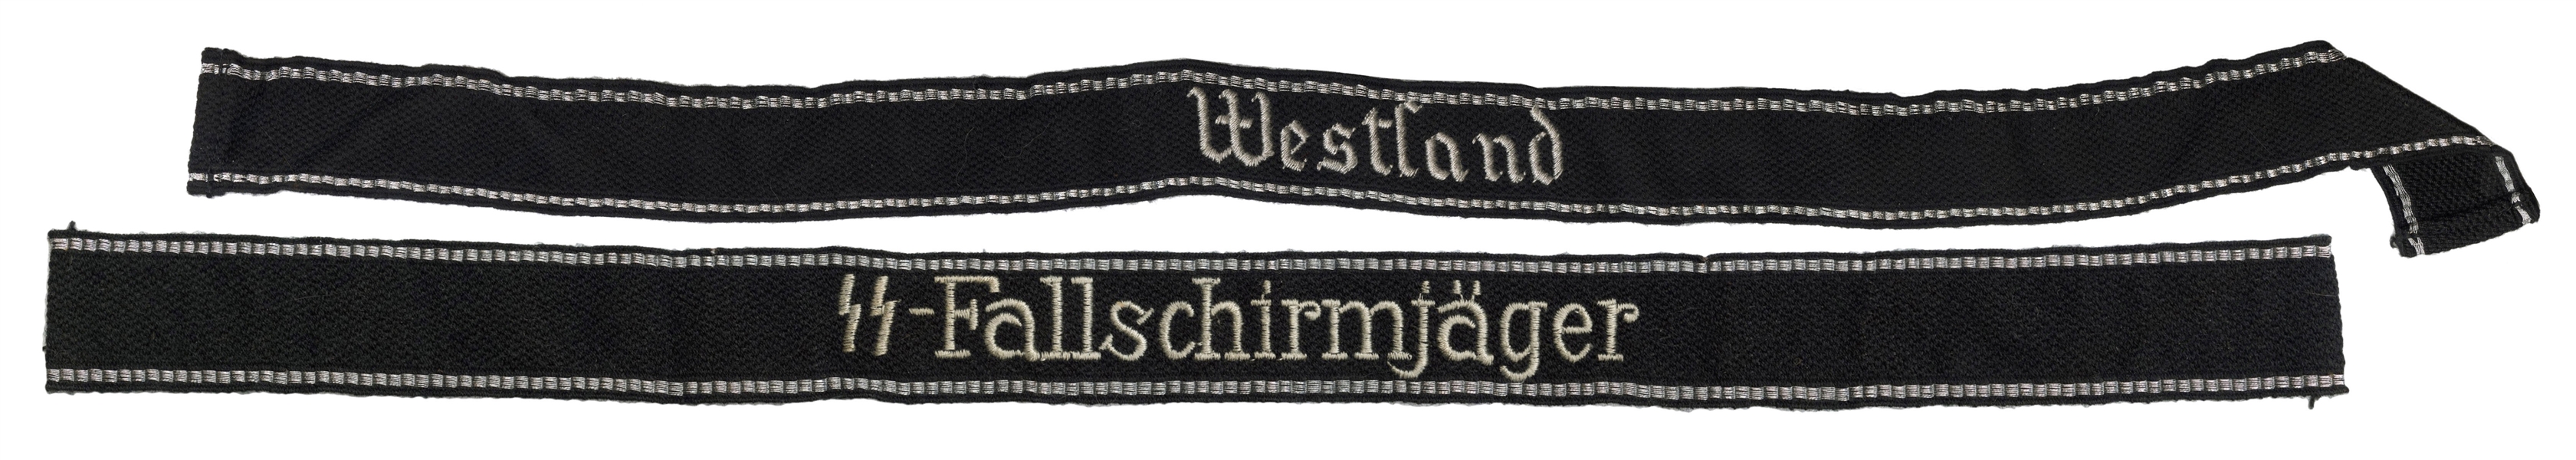  WWII German Soldier Cuff Titles, Straps, Patches, and Helme...